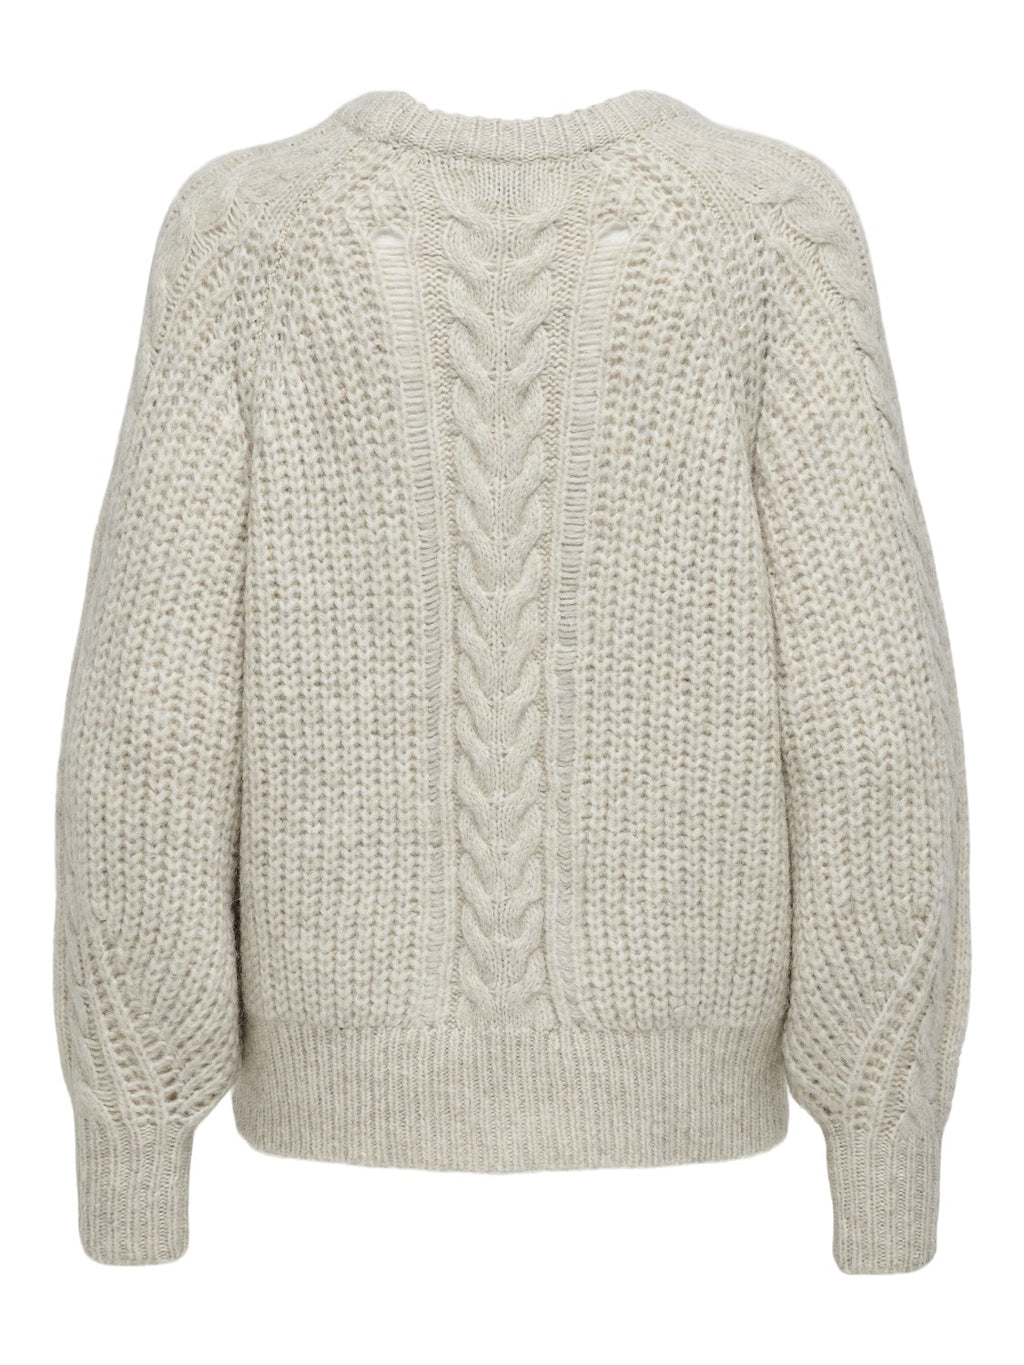 CHUNKY L/S CABLE O-NECK STRIK - PUMICE STONE